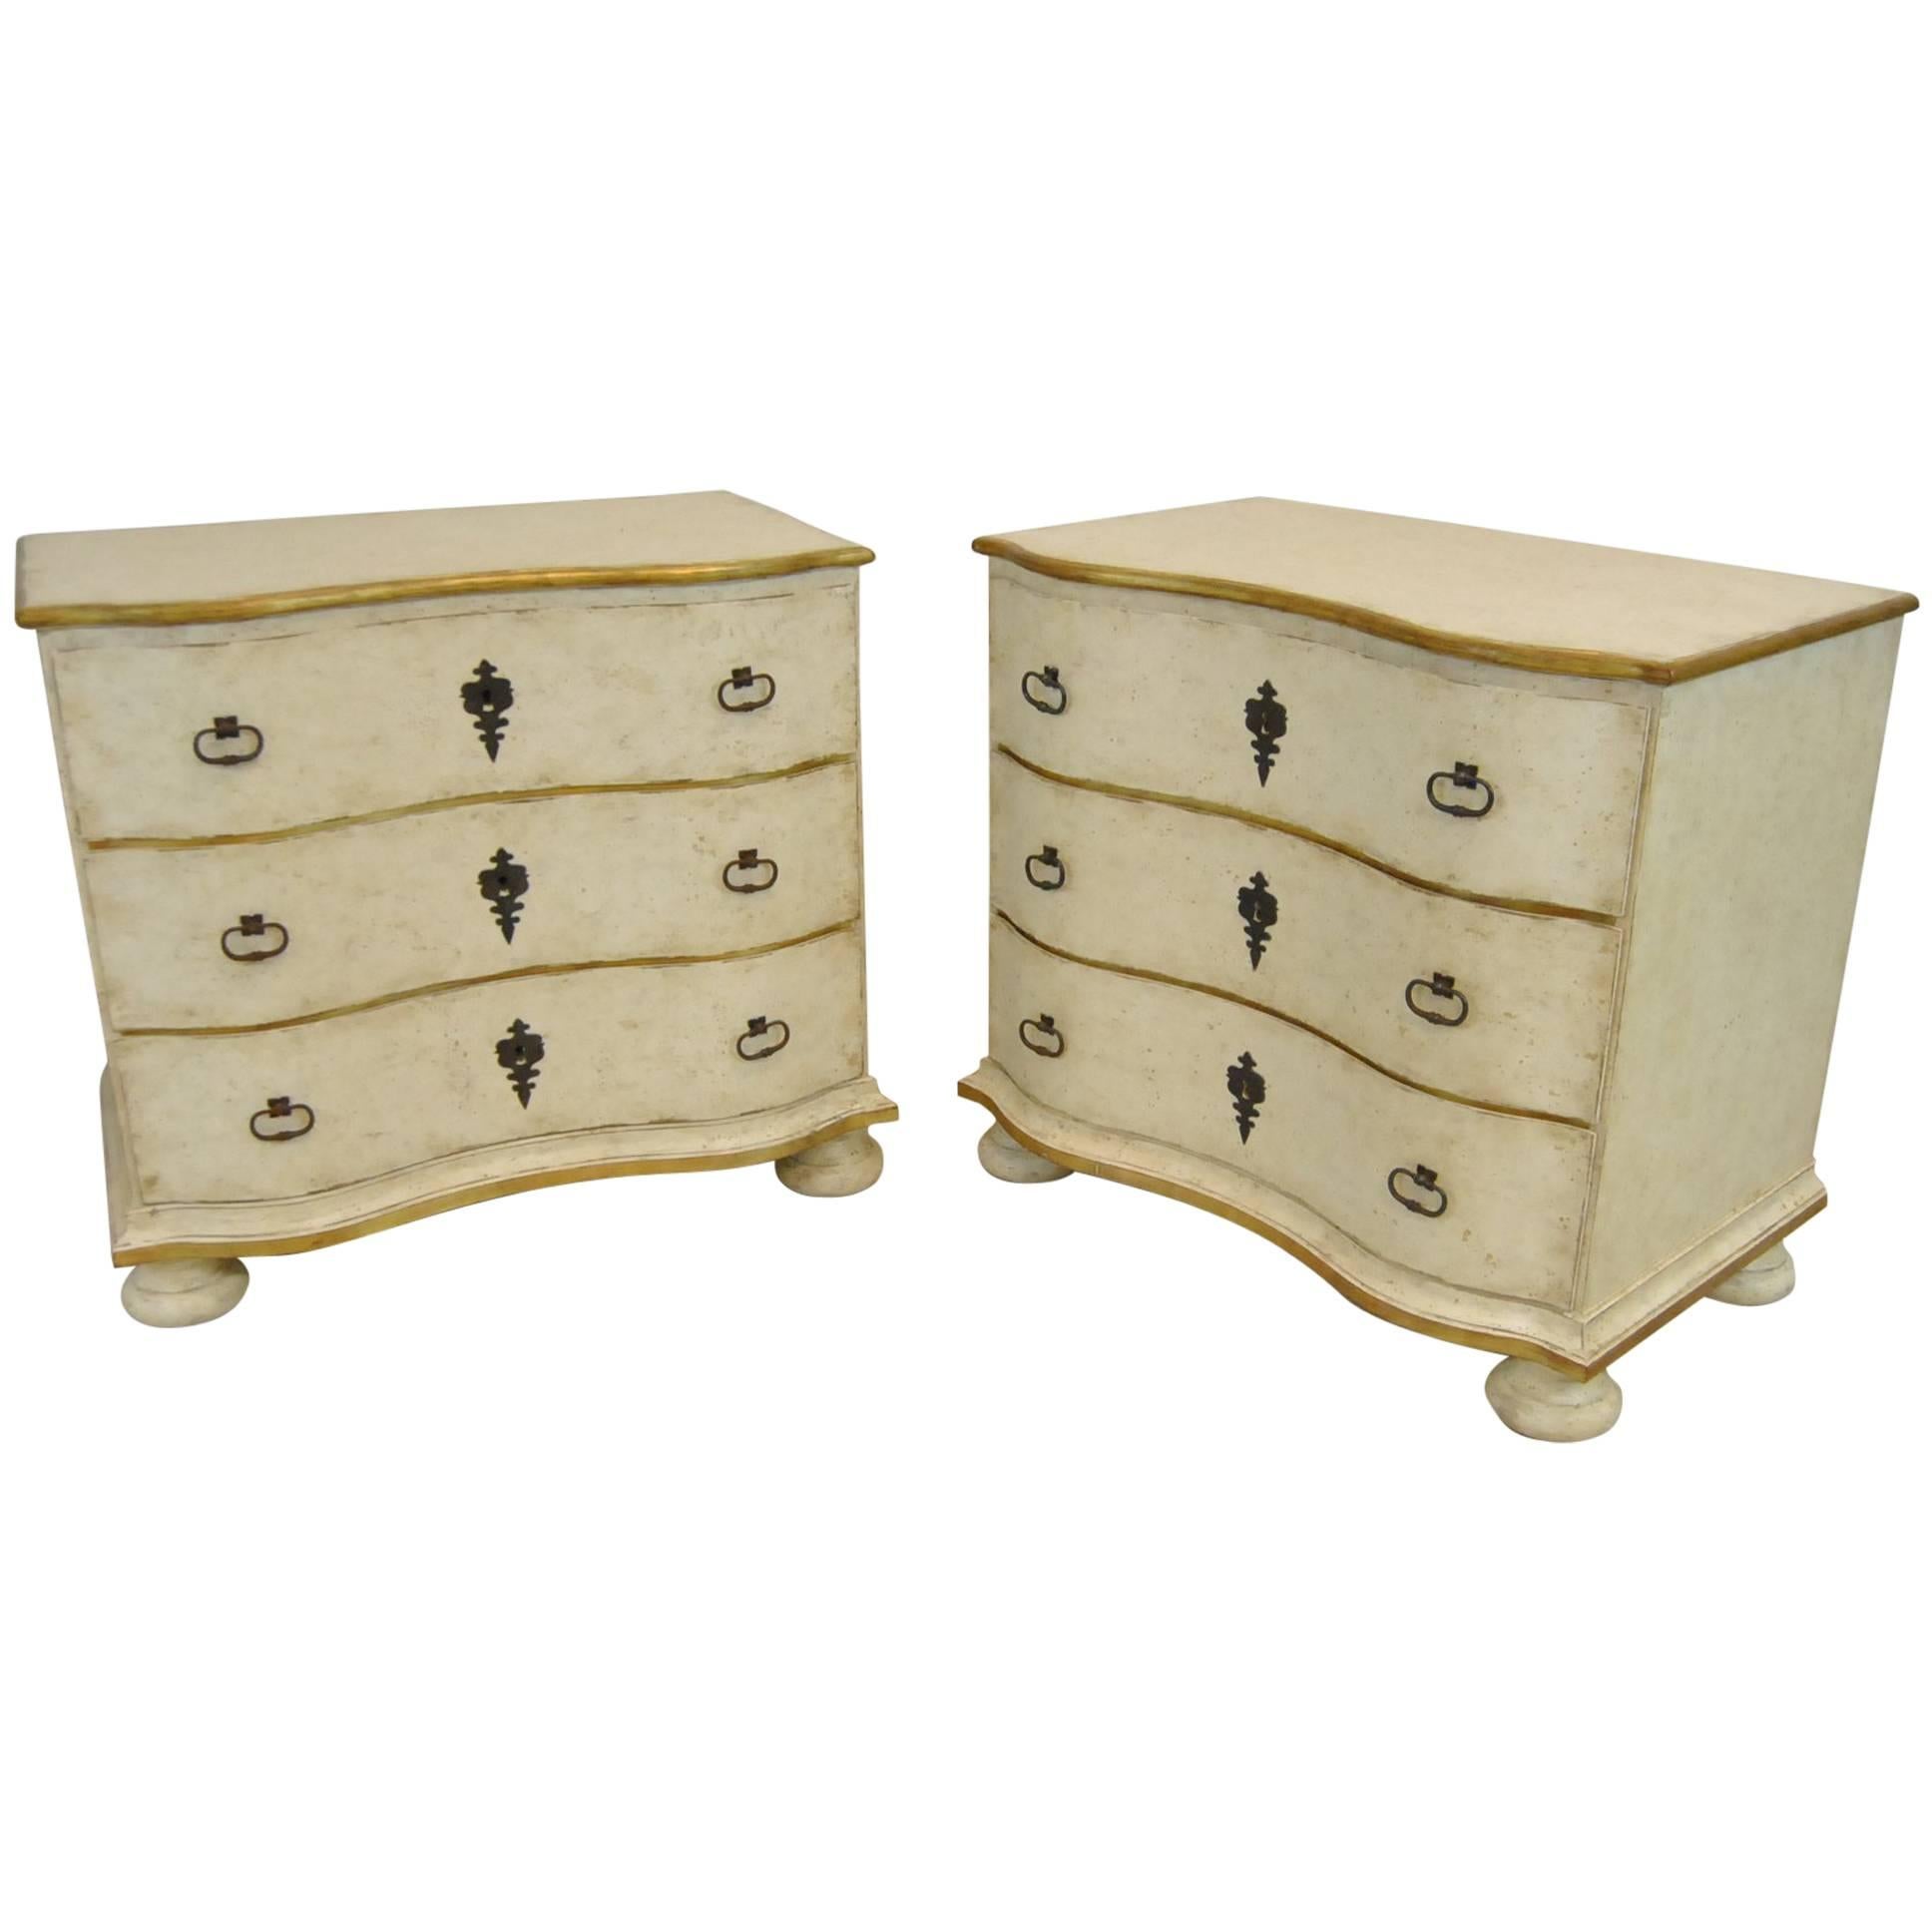 Pair of Amy Howard Serpentine Commode Chest of Drawers